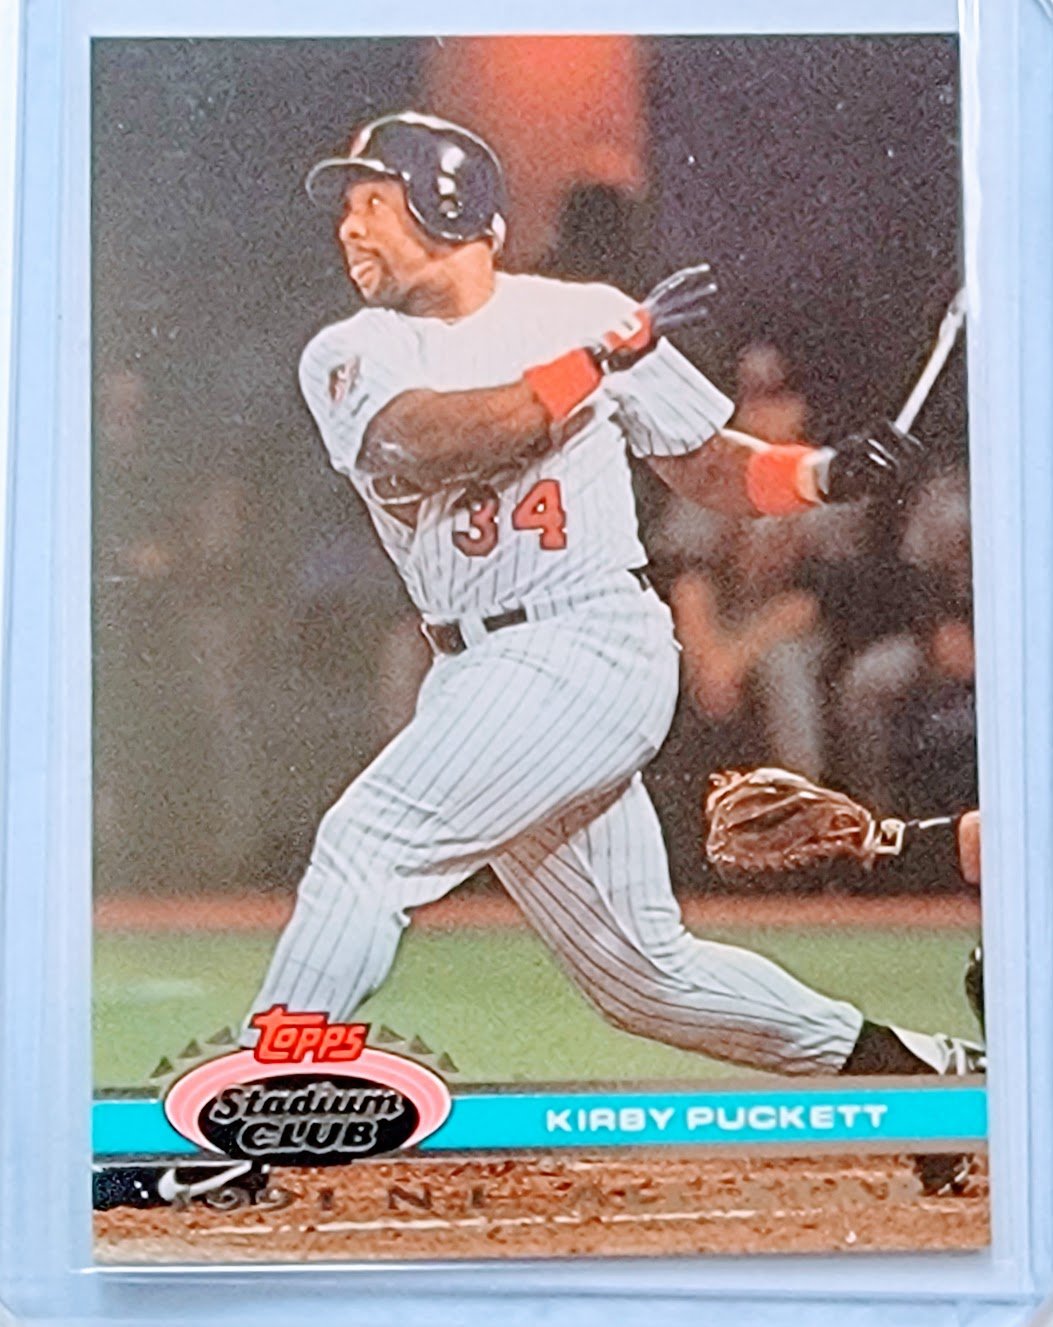 1992 Topps Stadium Club Dome Kirby Puckett 1991 Playoff MLB Baseball Trading Card TPTV simple Xclusive Collectibles   